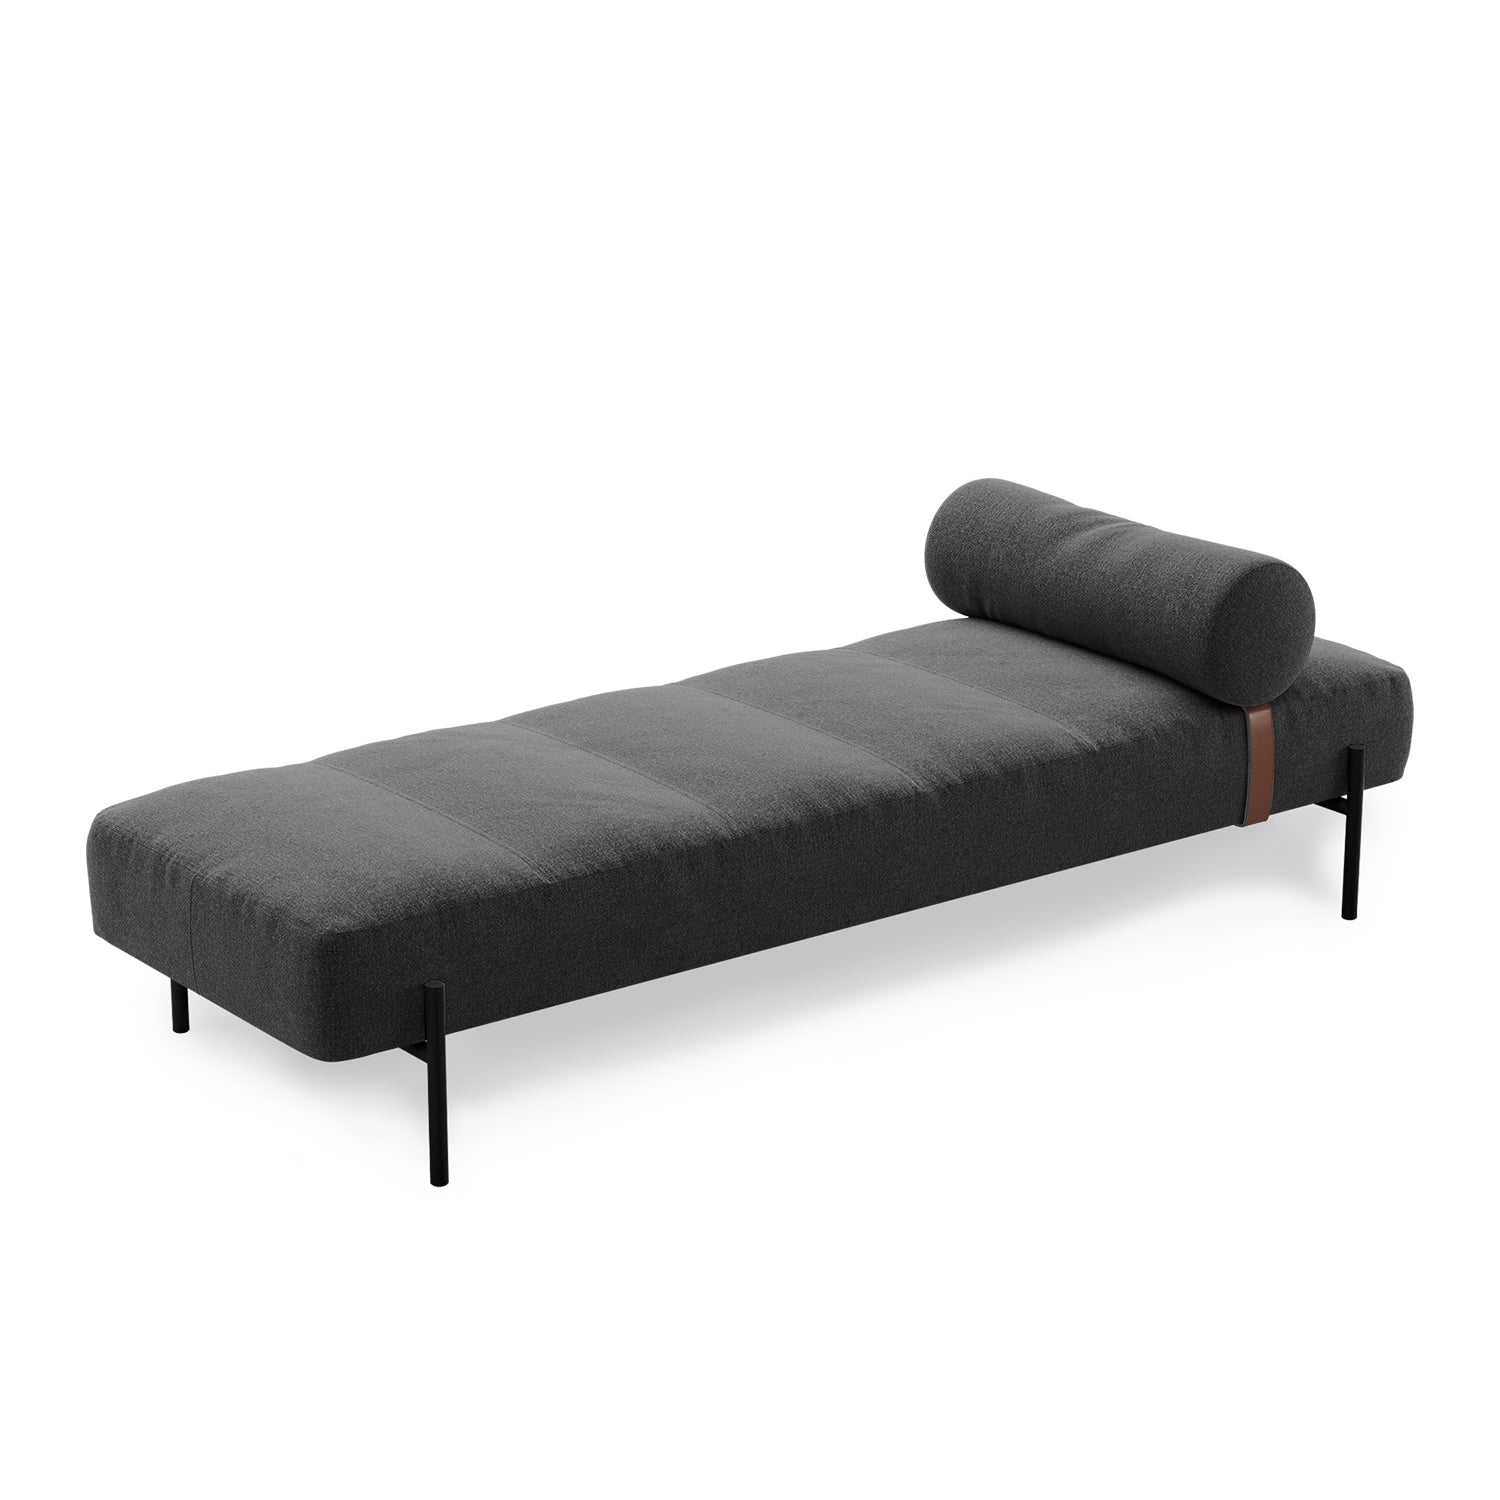 Northern Daybe Daybed in brusvik 08 and Black legs